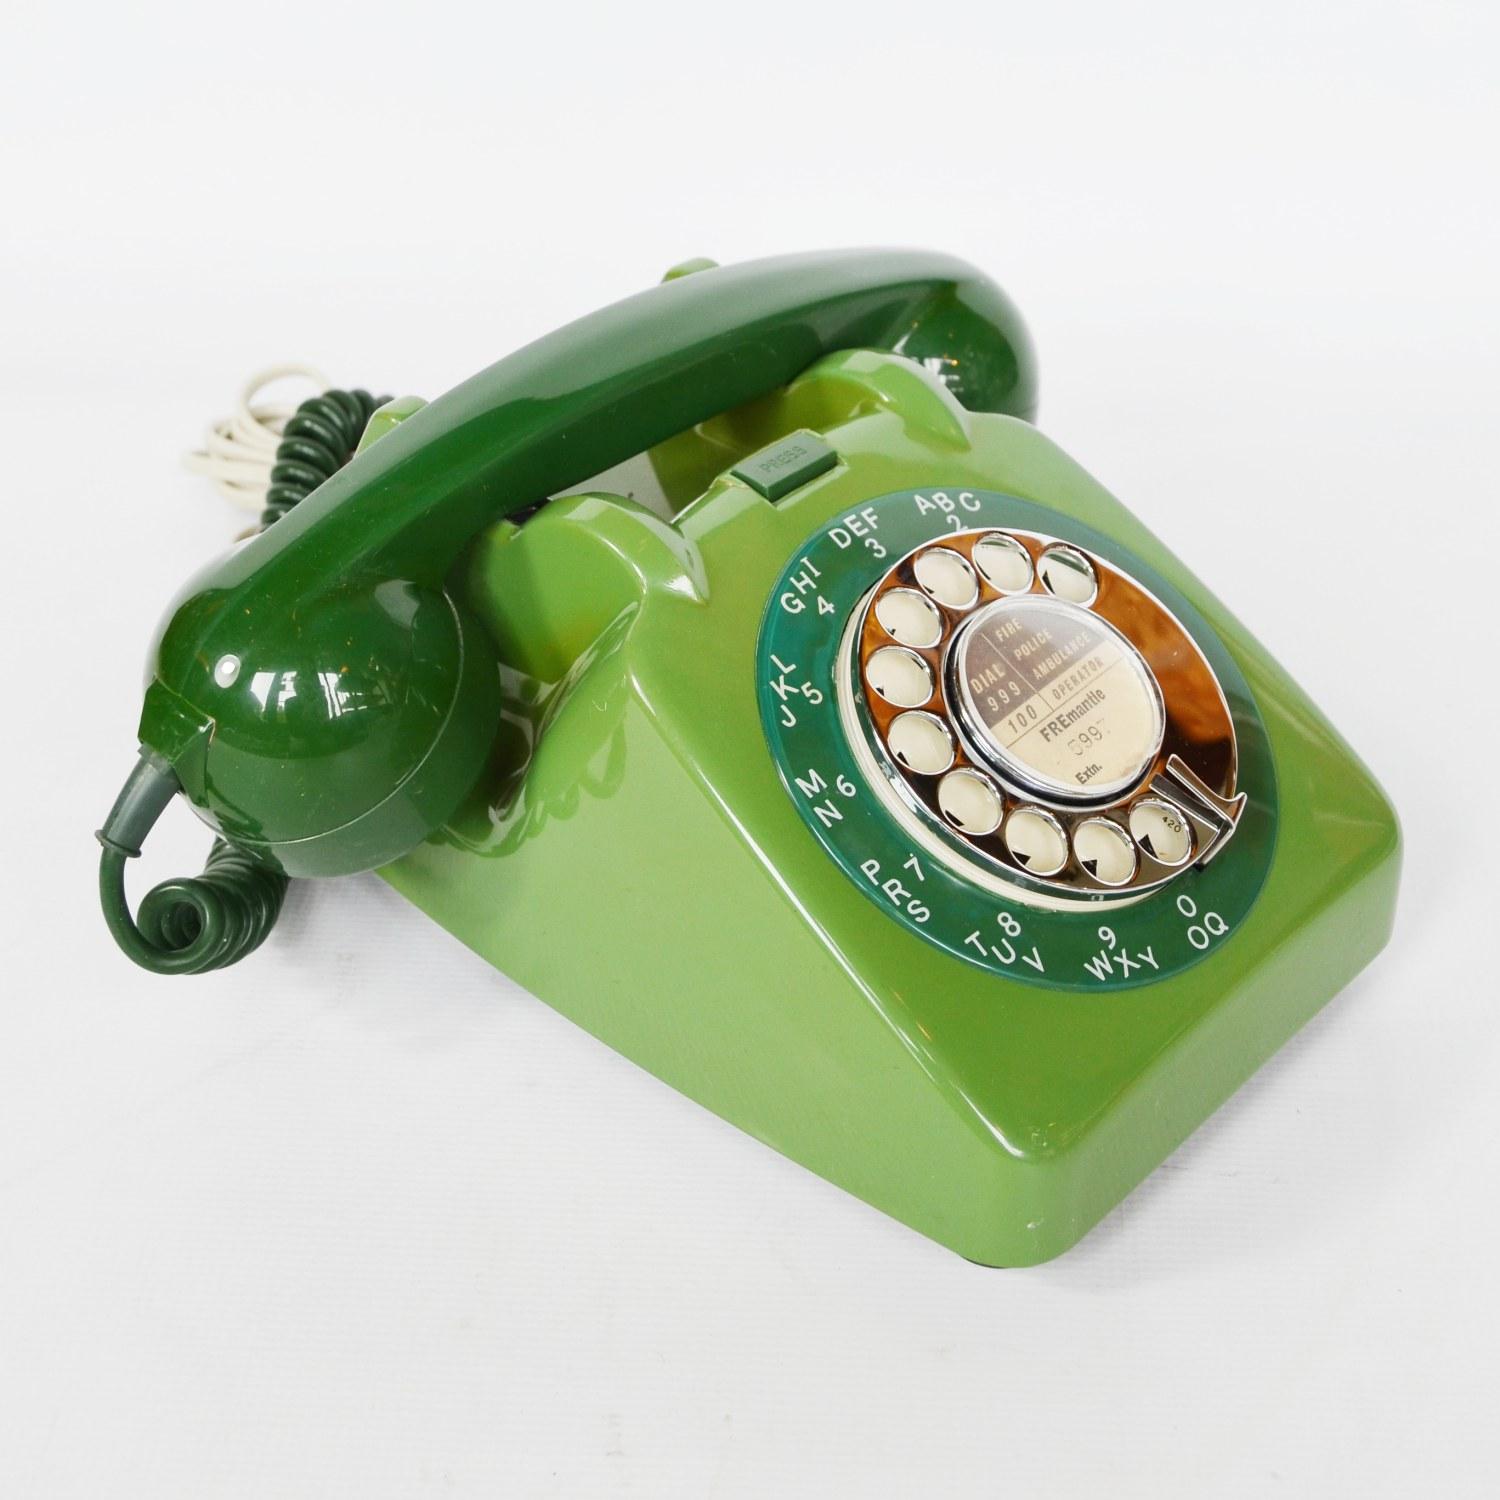 An original GPO model 706L telephone. Two-tone green with bell control switch at front.

Dimensions: H 14. 5cm, W 10 cm, D 22 cm

Origin: English

Date: circa 1960

Item no: 110215

All of our telephones are fully refurbished, re-wired and